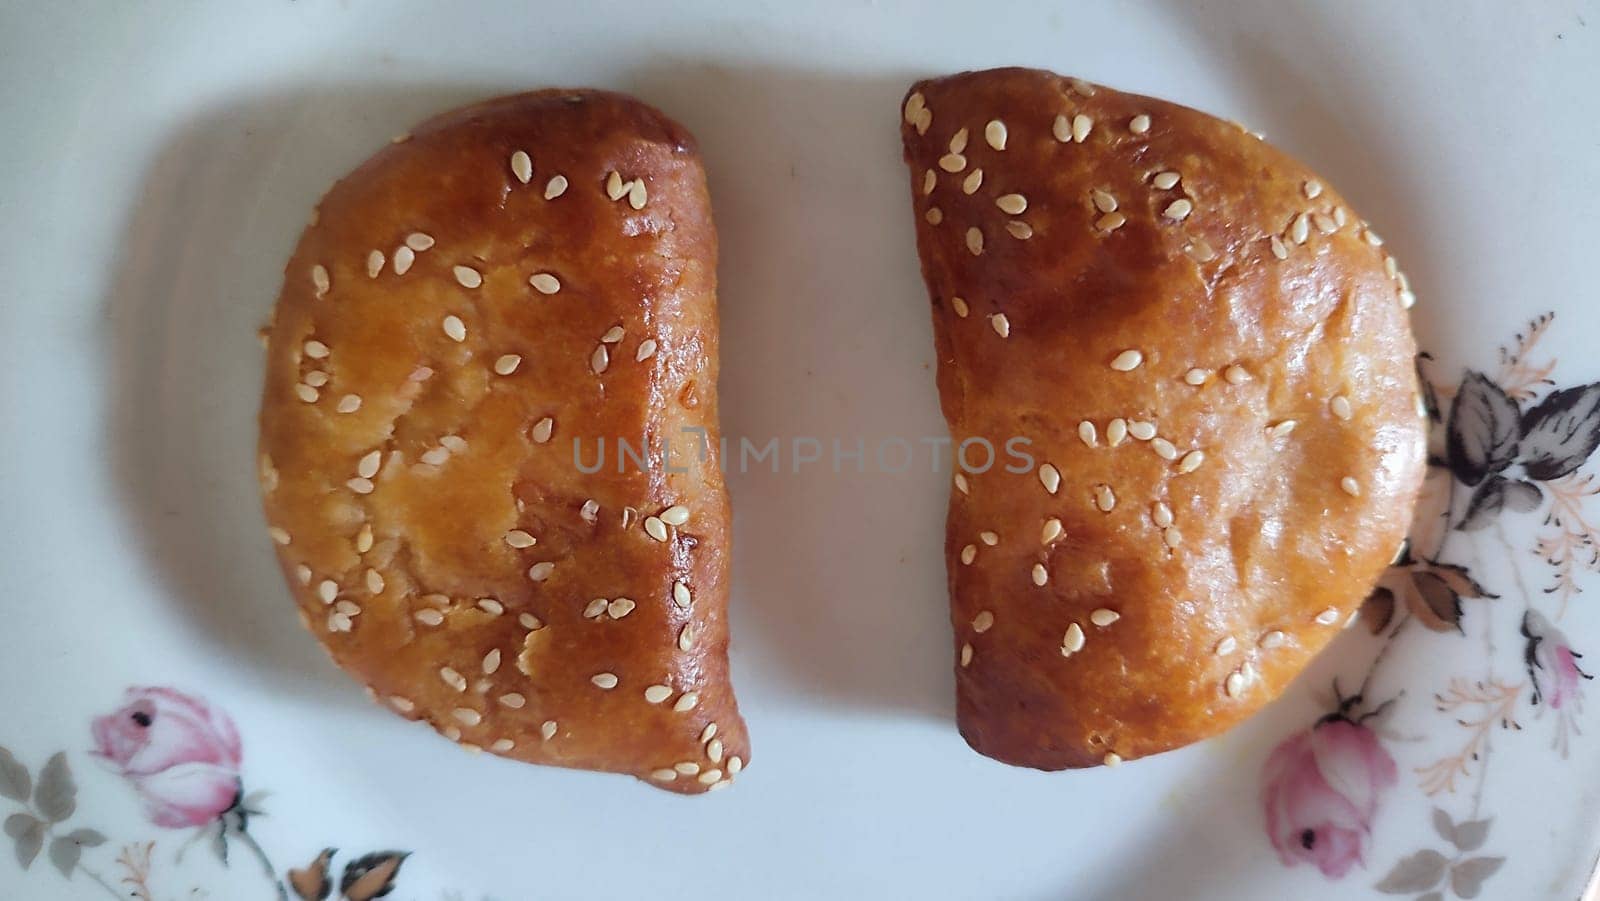 baking pie with sesame seeds on a plate. High quality photo